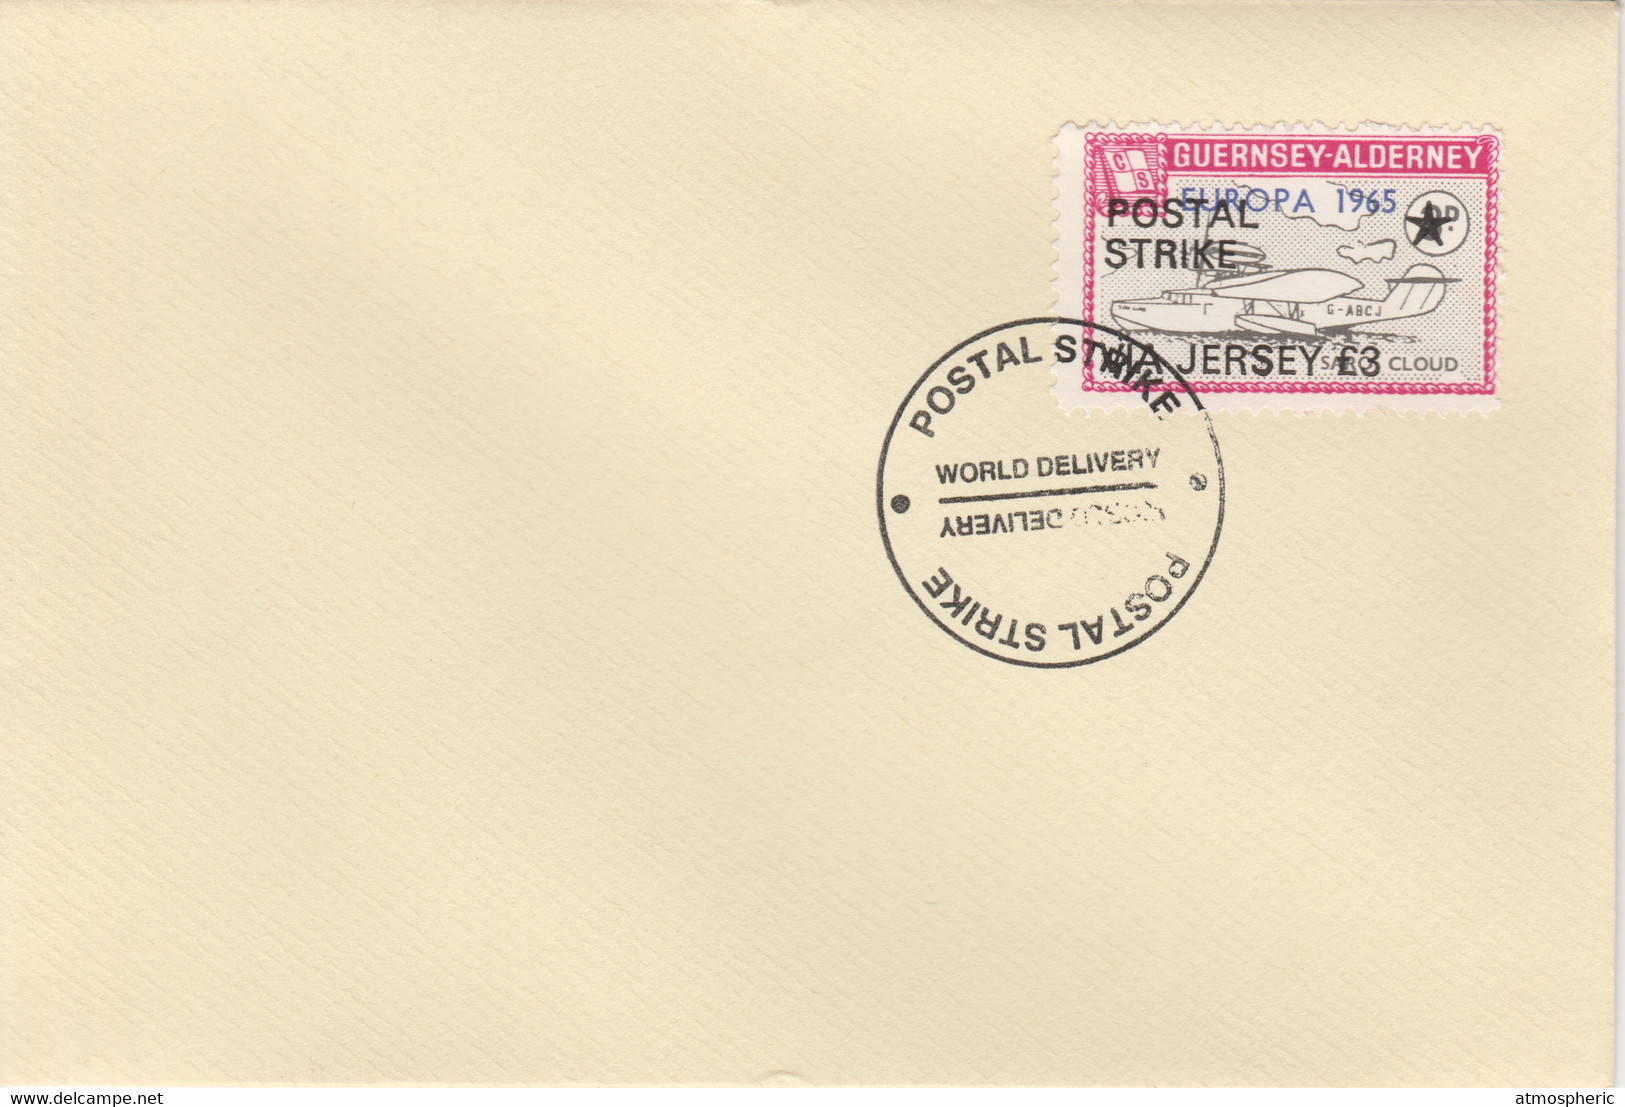 Guernsey - Alderney 1971 Postal Strike Cover To Jersey Bearing Flying Boat Saro Cloud 3d Overprinted Europa 1965 - Sin Clasificación